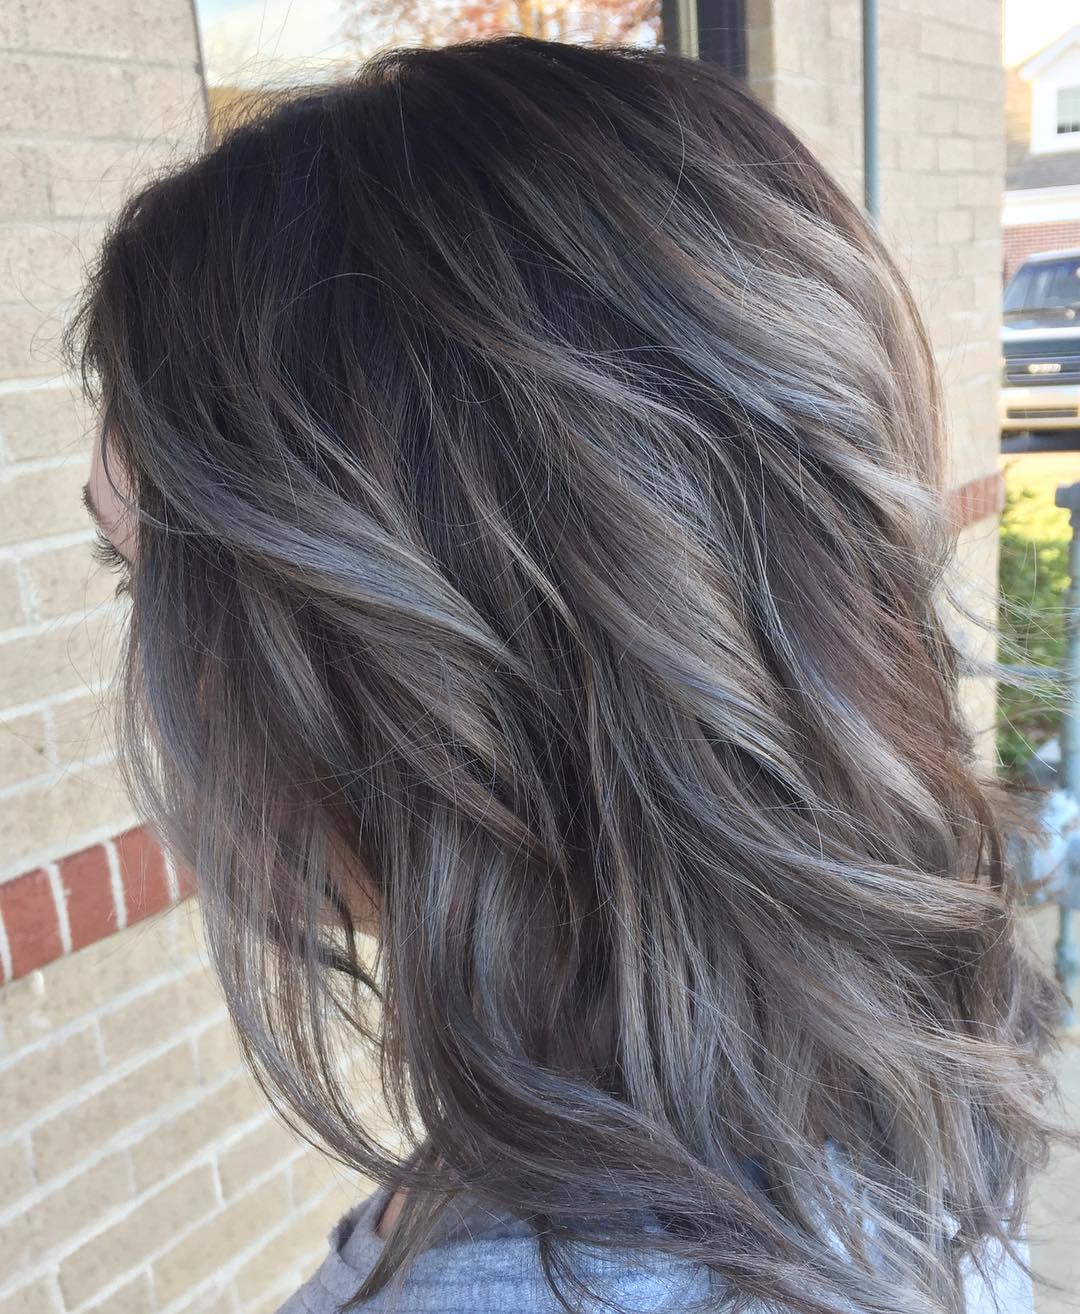 Brown Hair With Gray Highlights